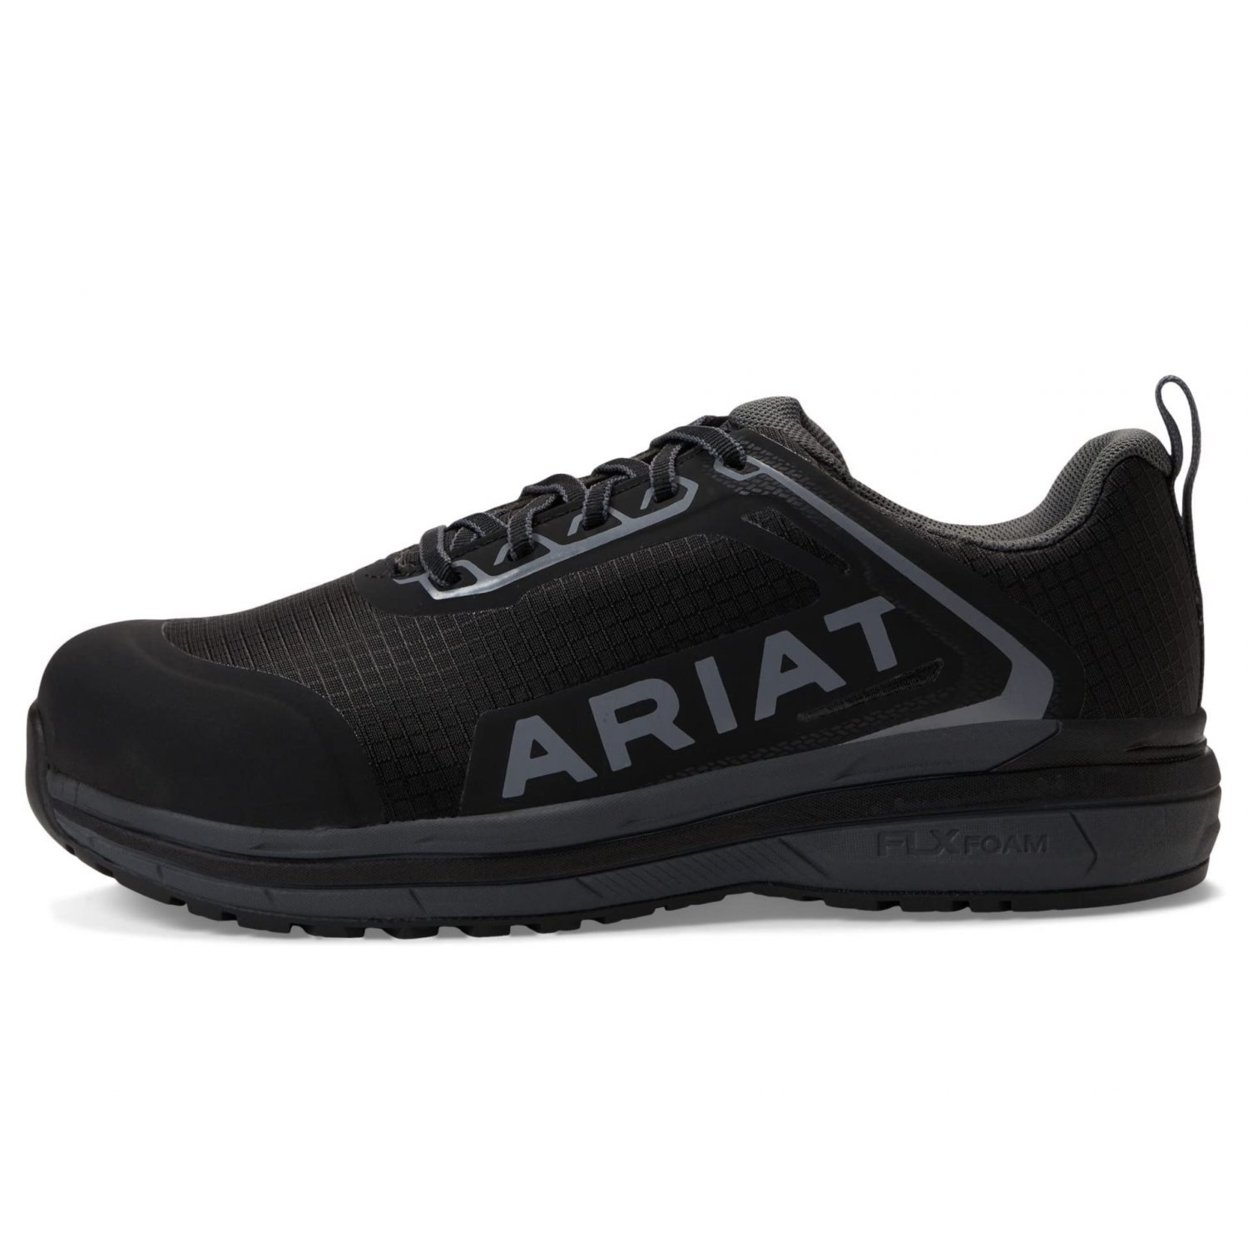 ARIAT Women's Outpace Composite Toe Safety Shoe Fire ONE SIZE BLACK - BLACK, 8